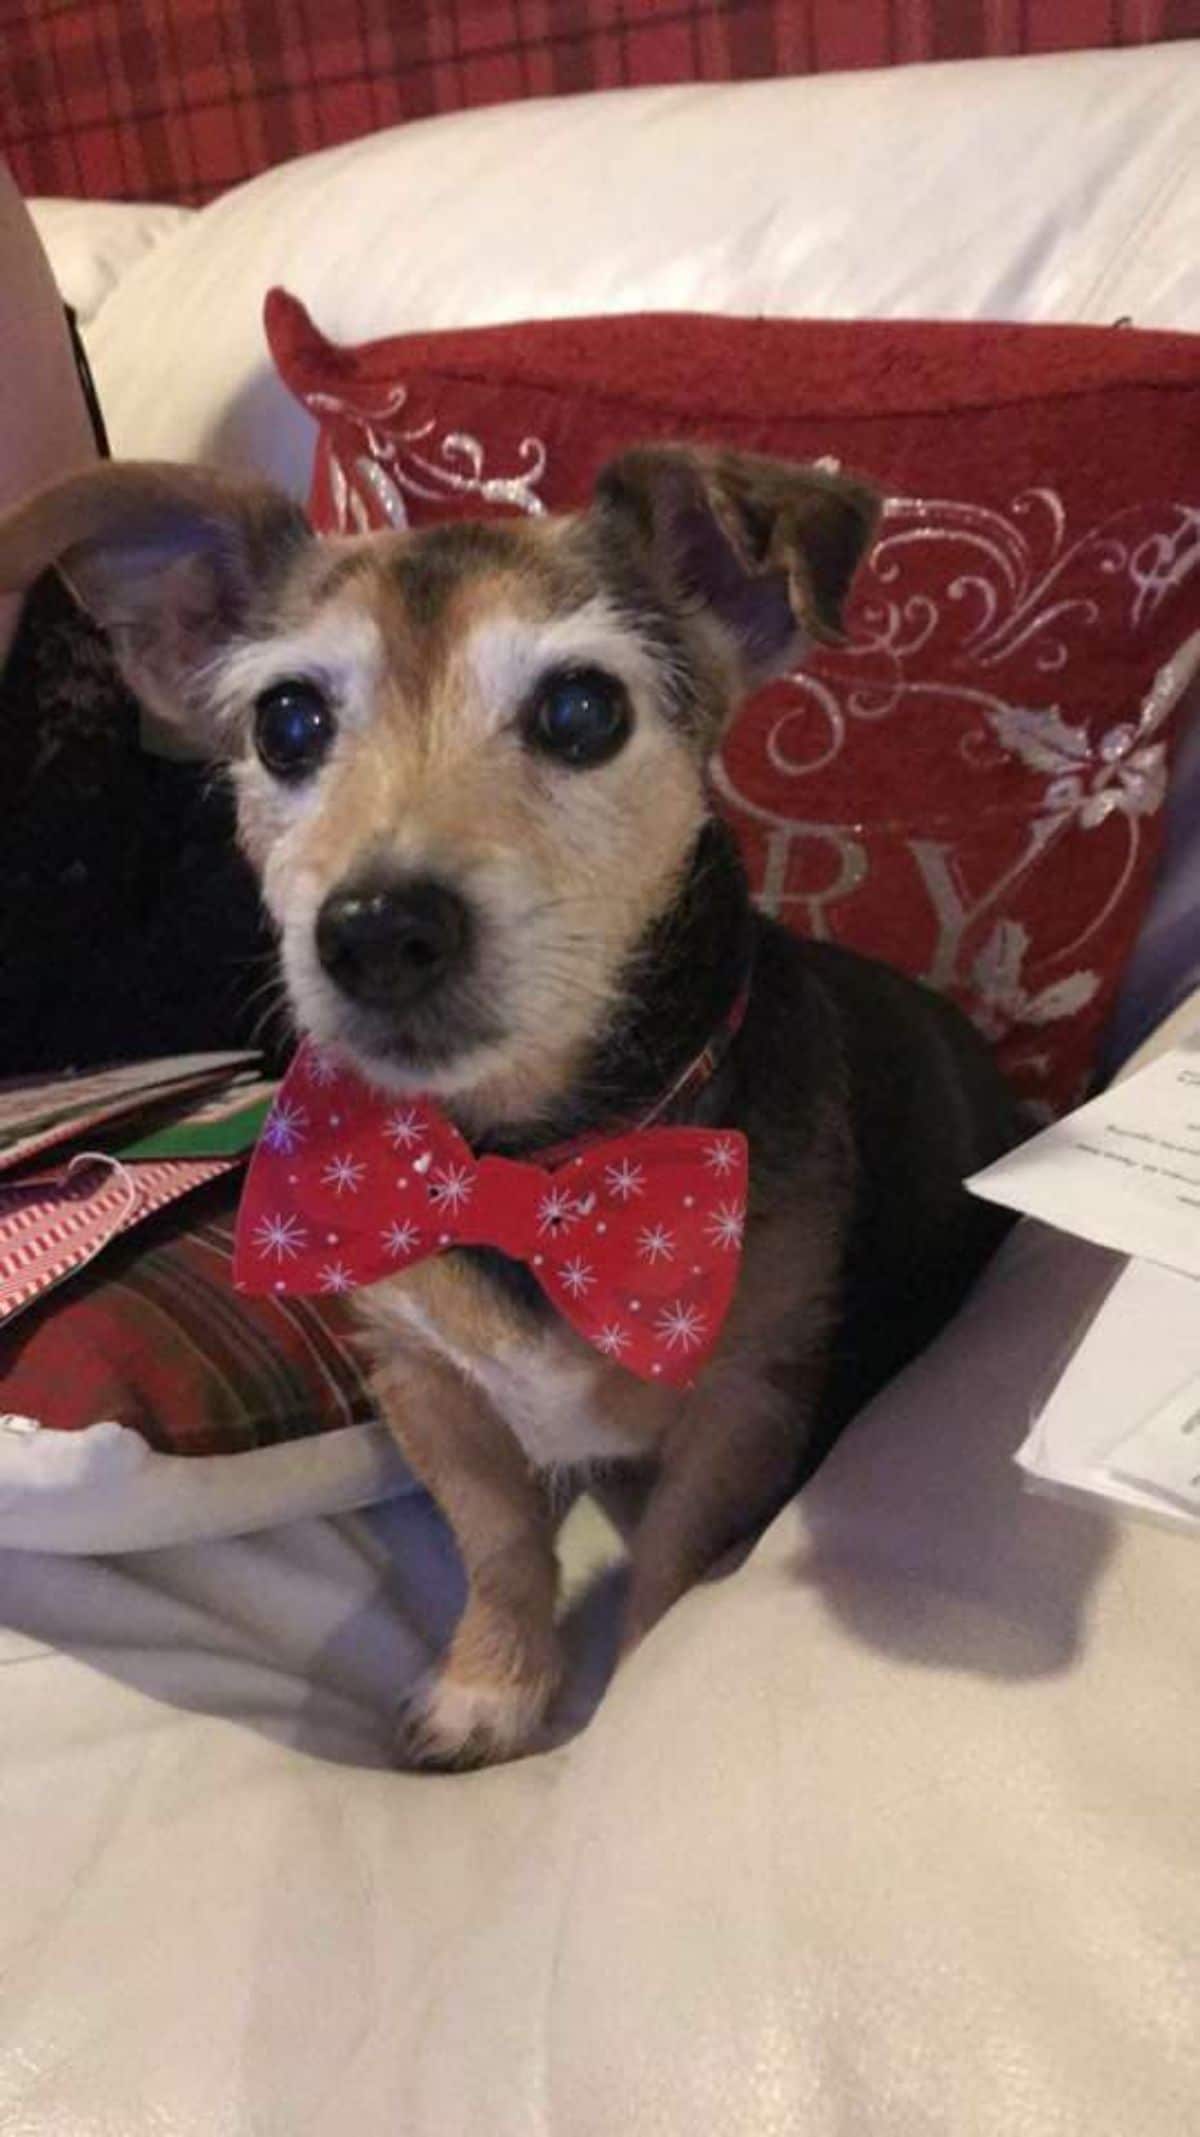 old black white and brown dog wearing a red bowtie with white stars in it